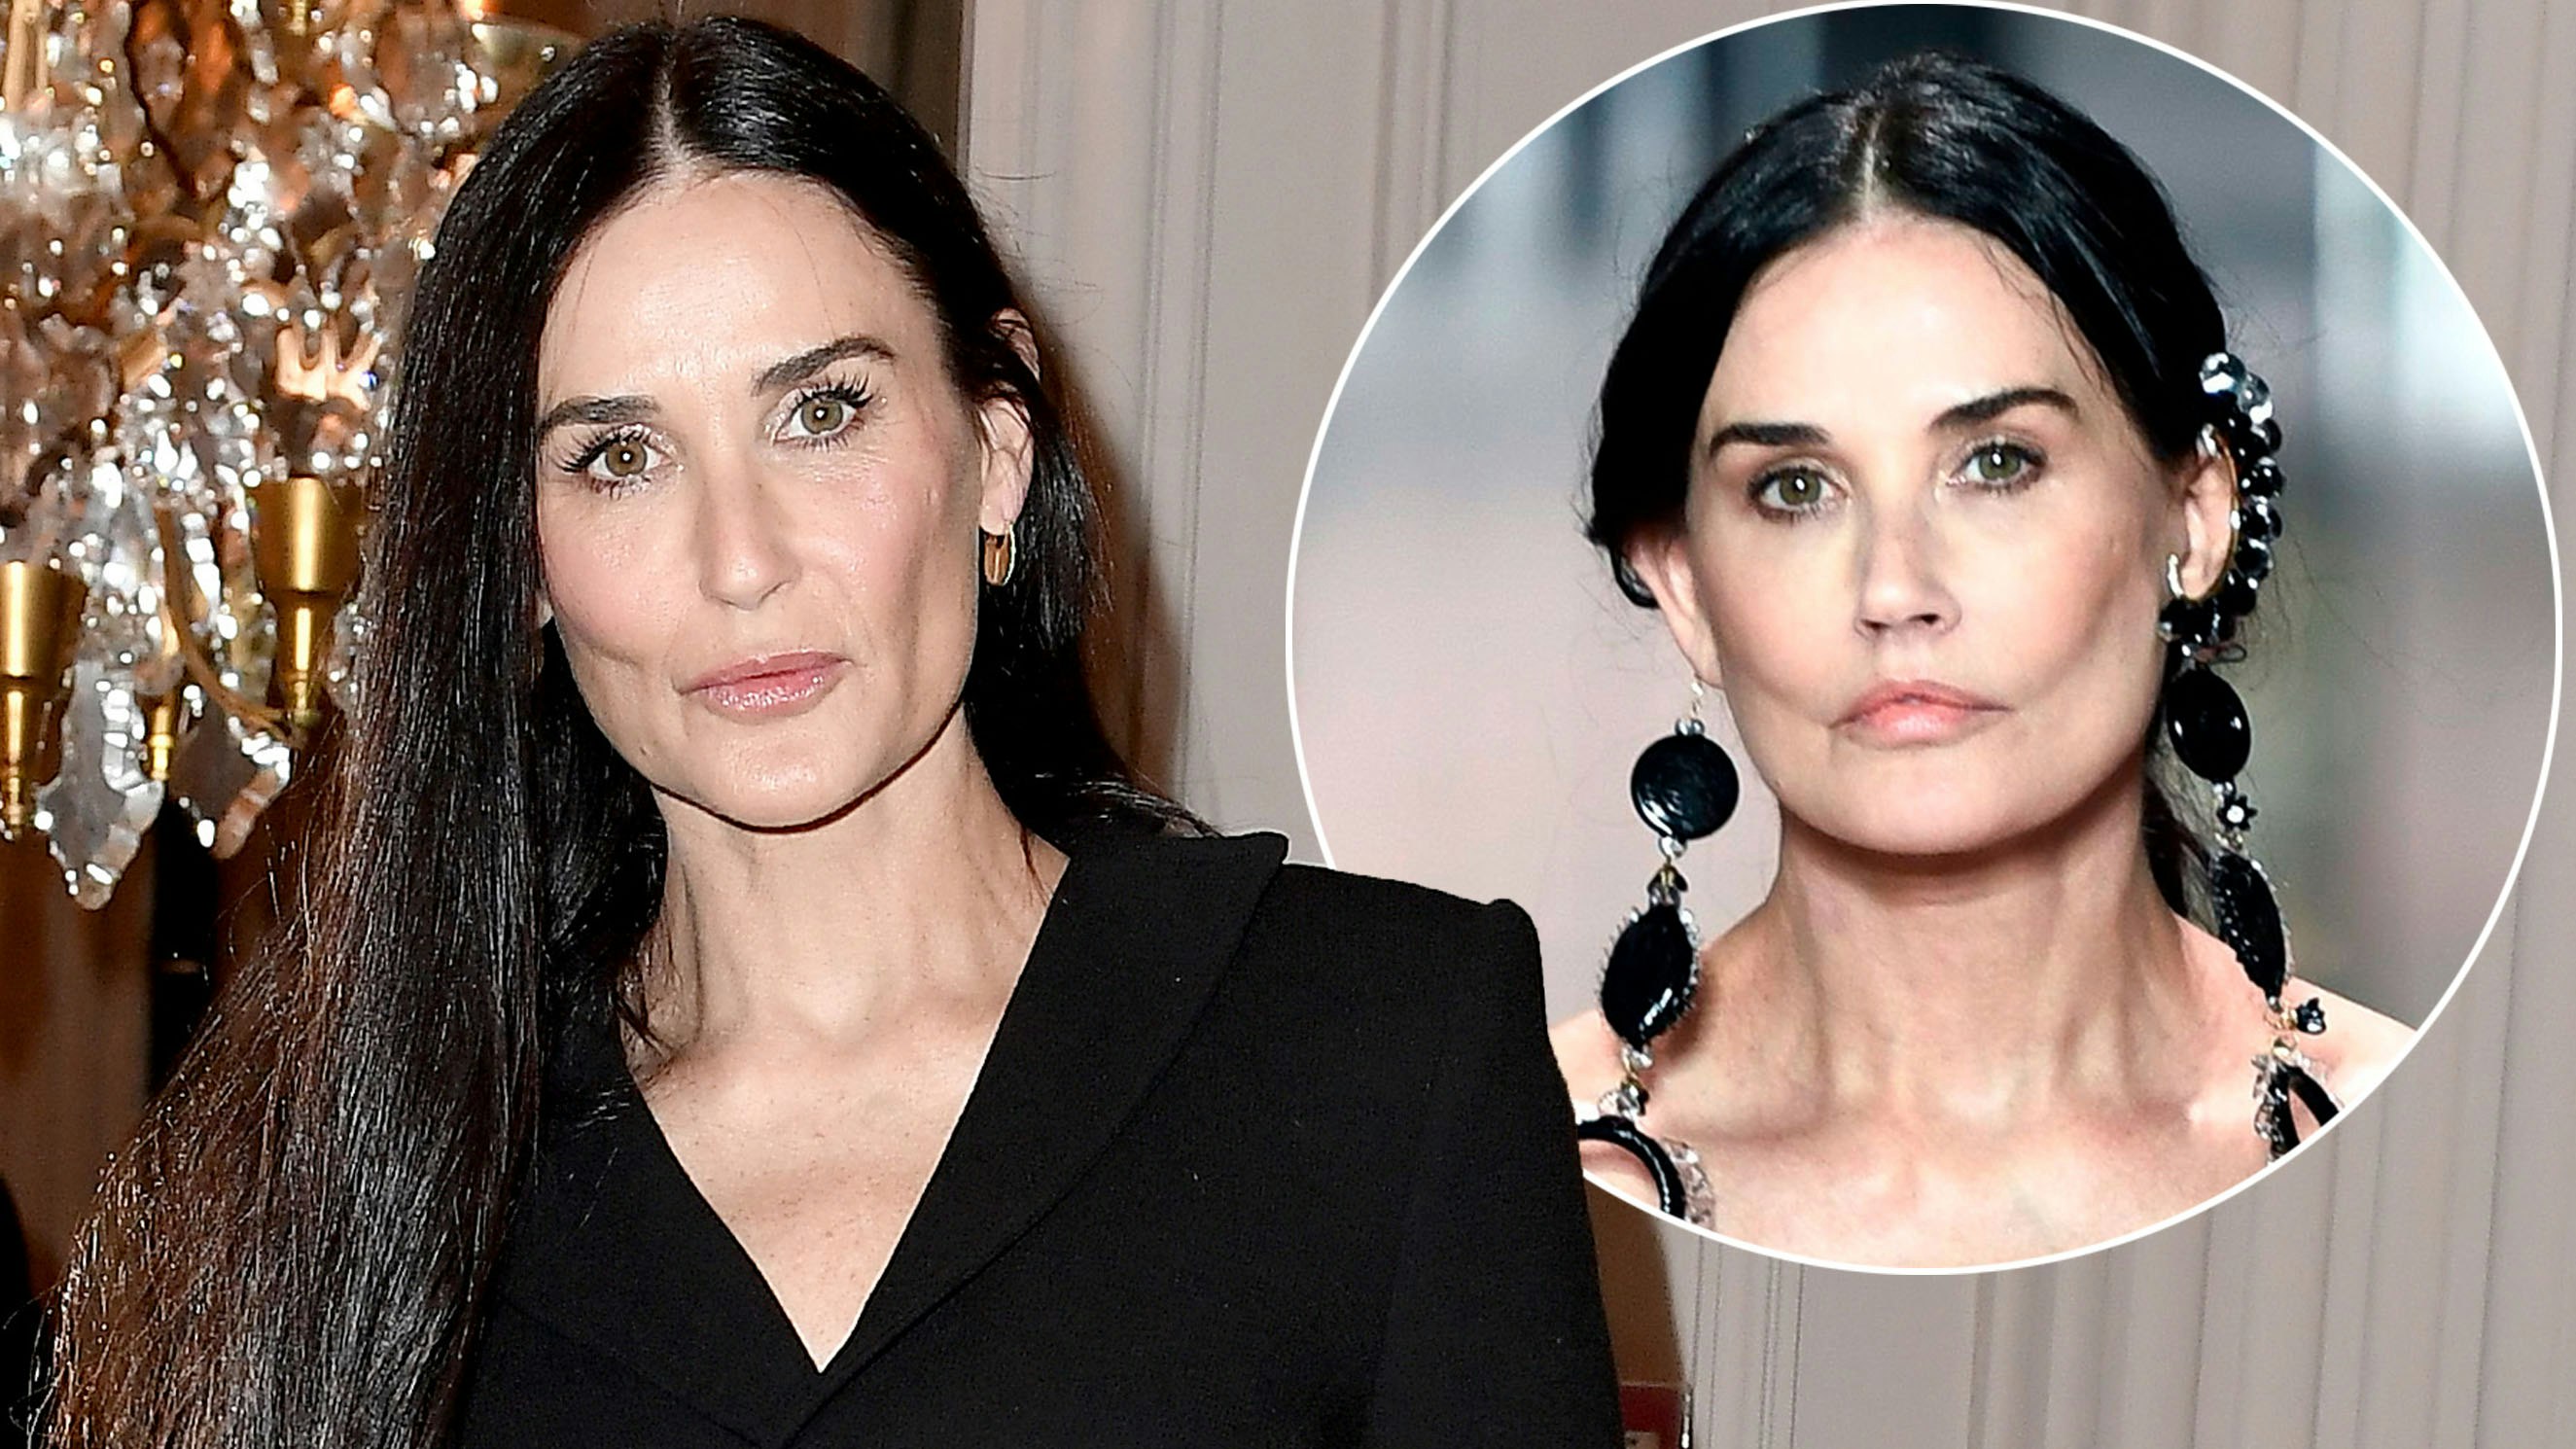 Demi Moore's surgery riddle